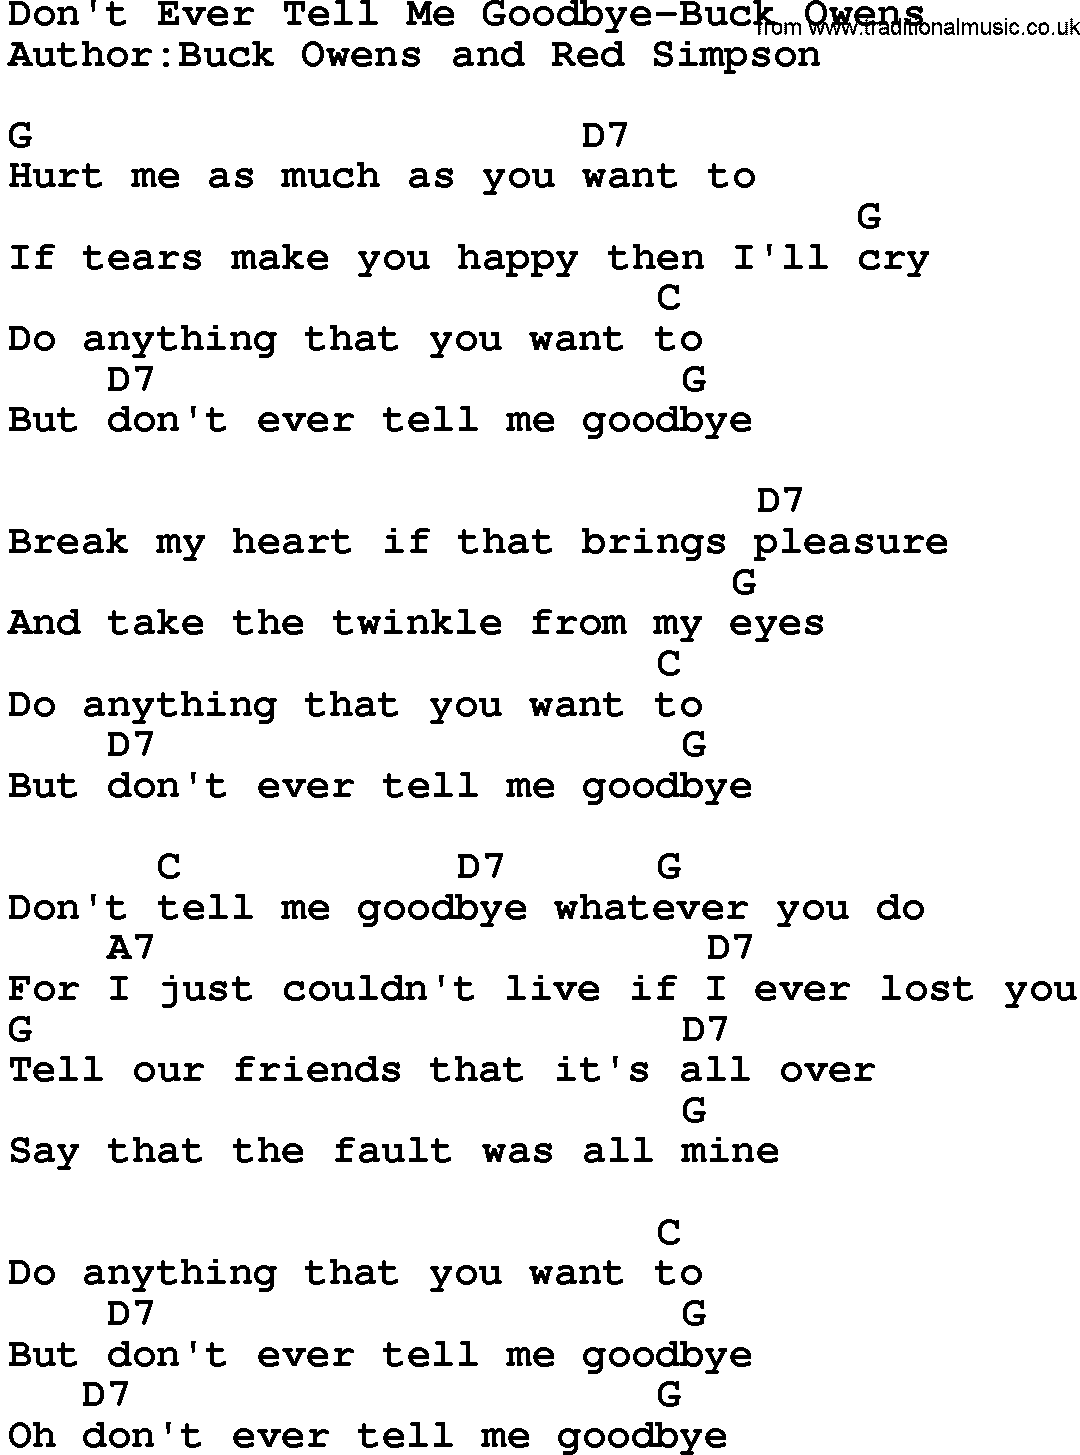 Country music song: Don't Ever Tell Me Goodbye-Buck Owens lyrics and chords